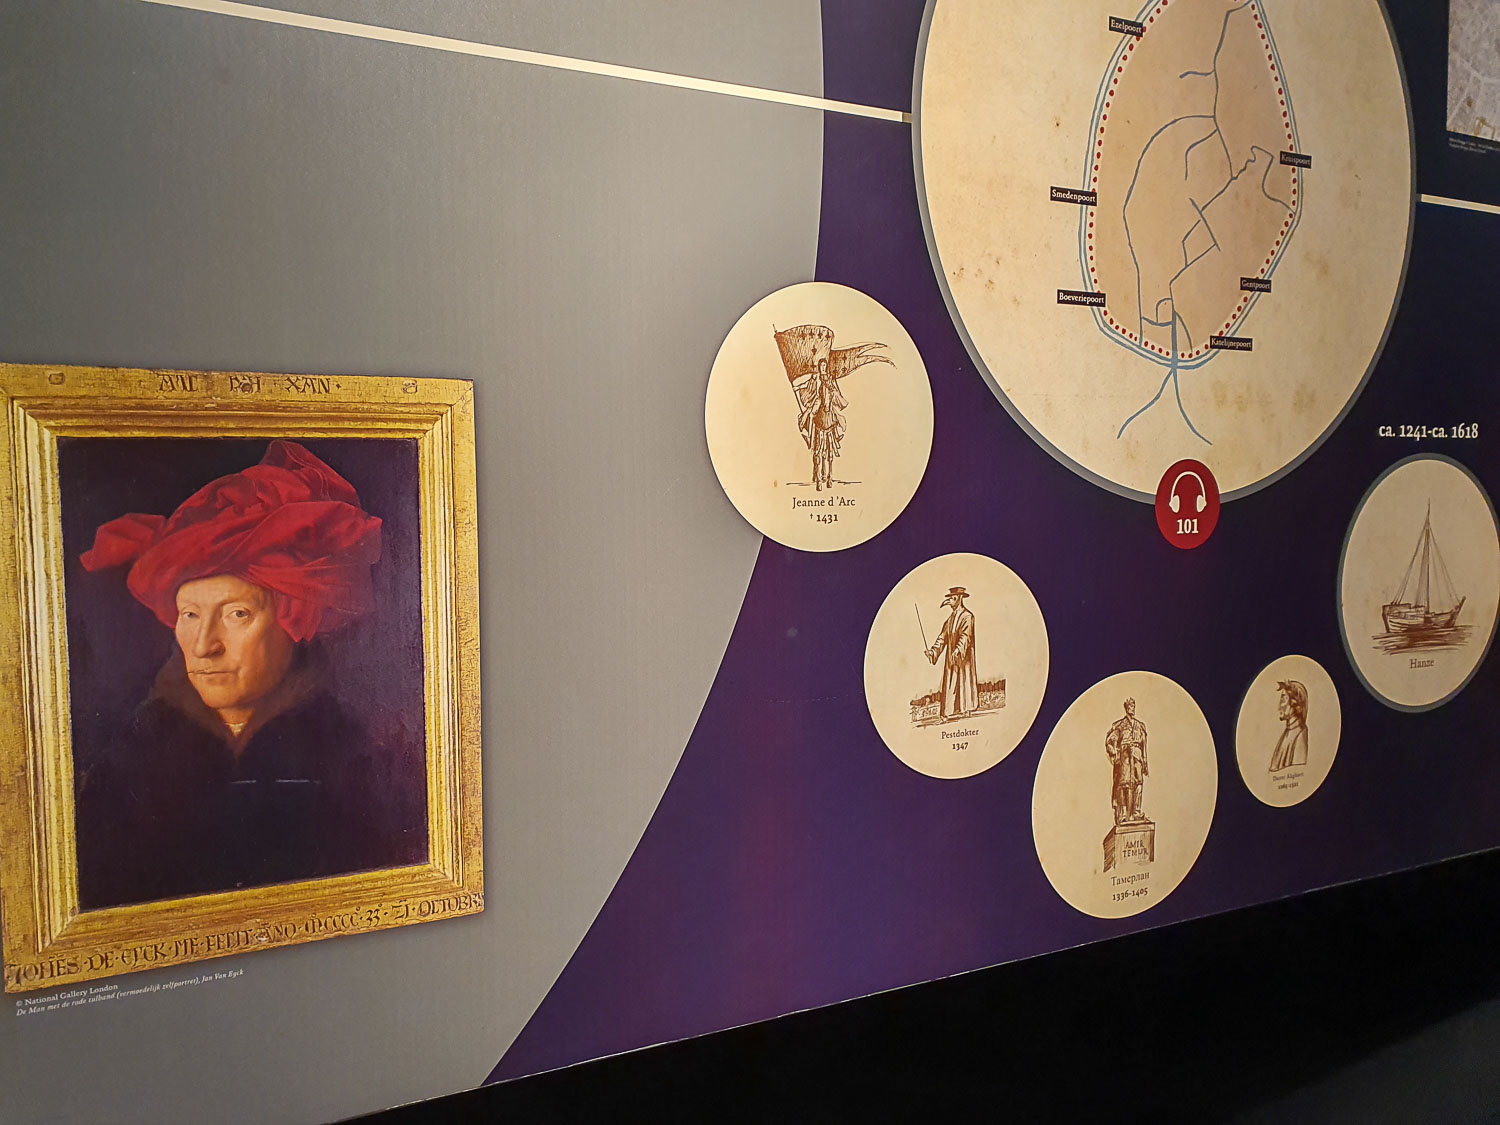 A display about artists and famous figures from history at the Historium in Bruges - one of the best things to do with kids in Bruges to learn more about the city's past